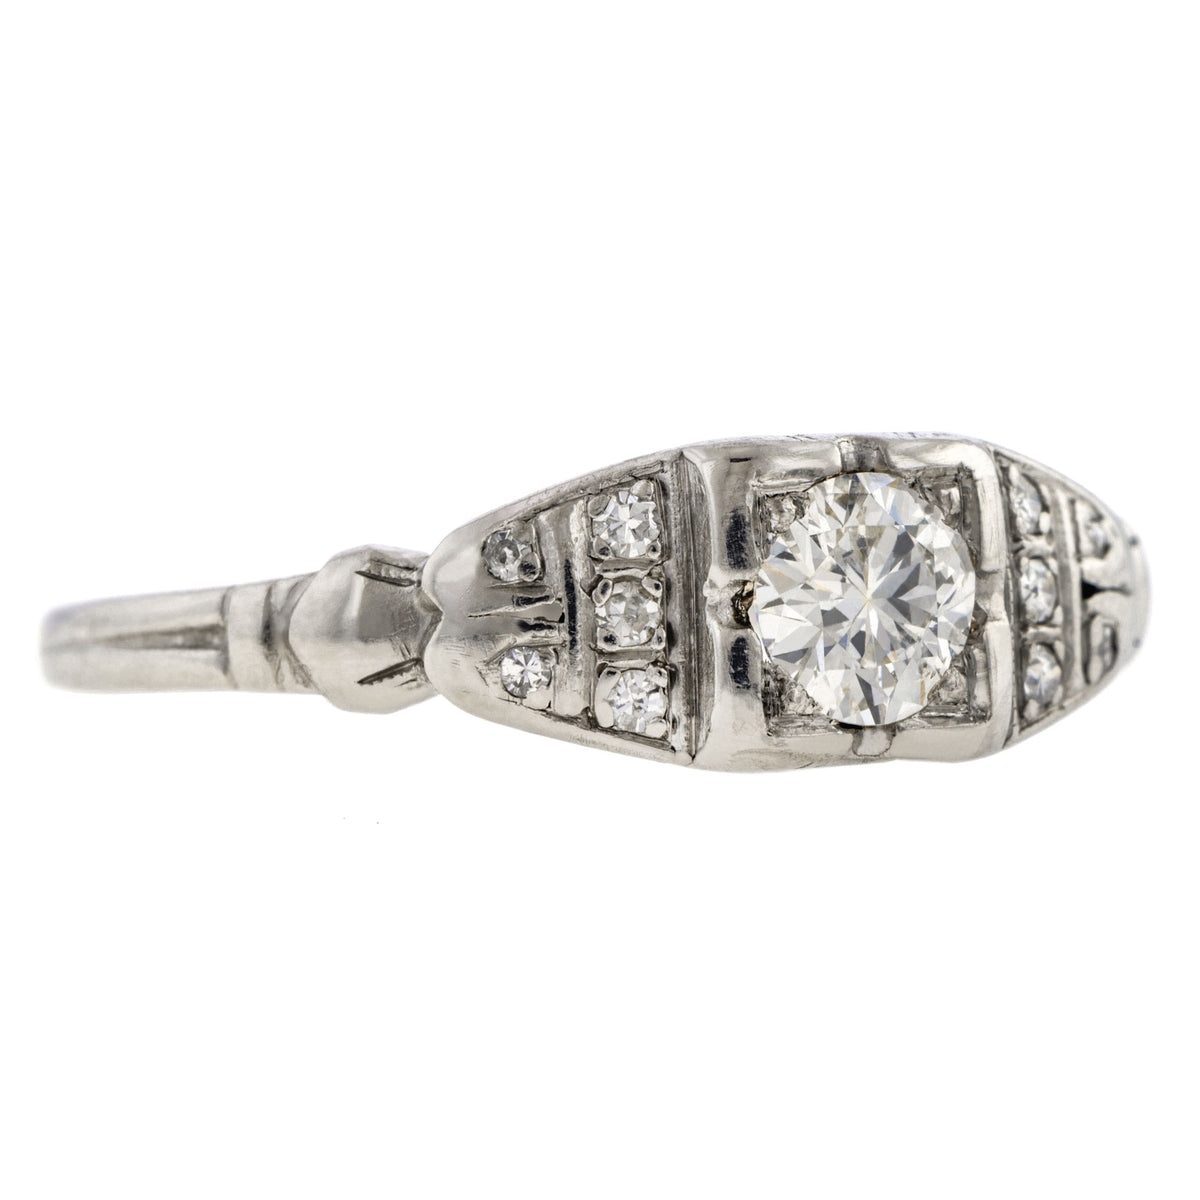 Art Deco ring; a Platinum Round Brilliant Cut Diamond Engagement Ring sold by Doyle & Doyle vintage and antique jewelry boutique.